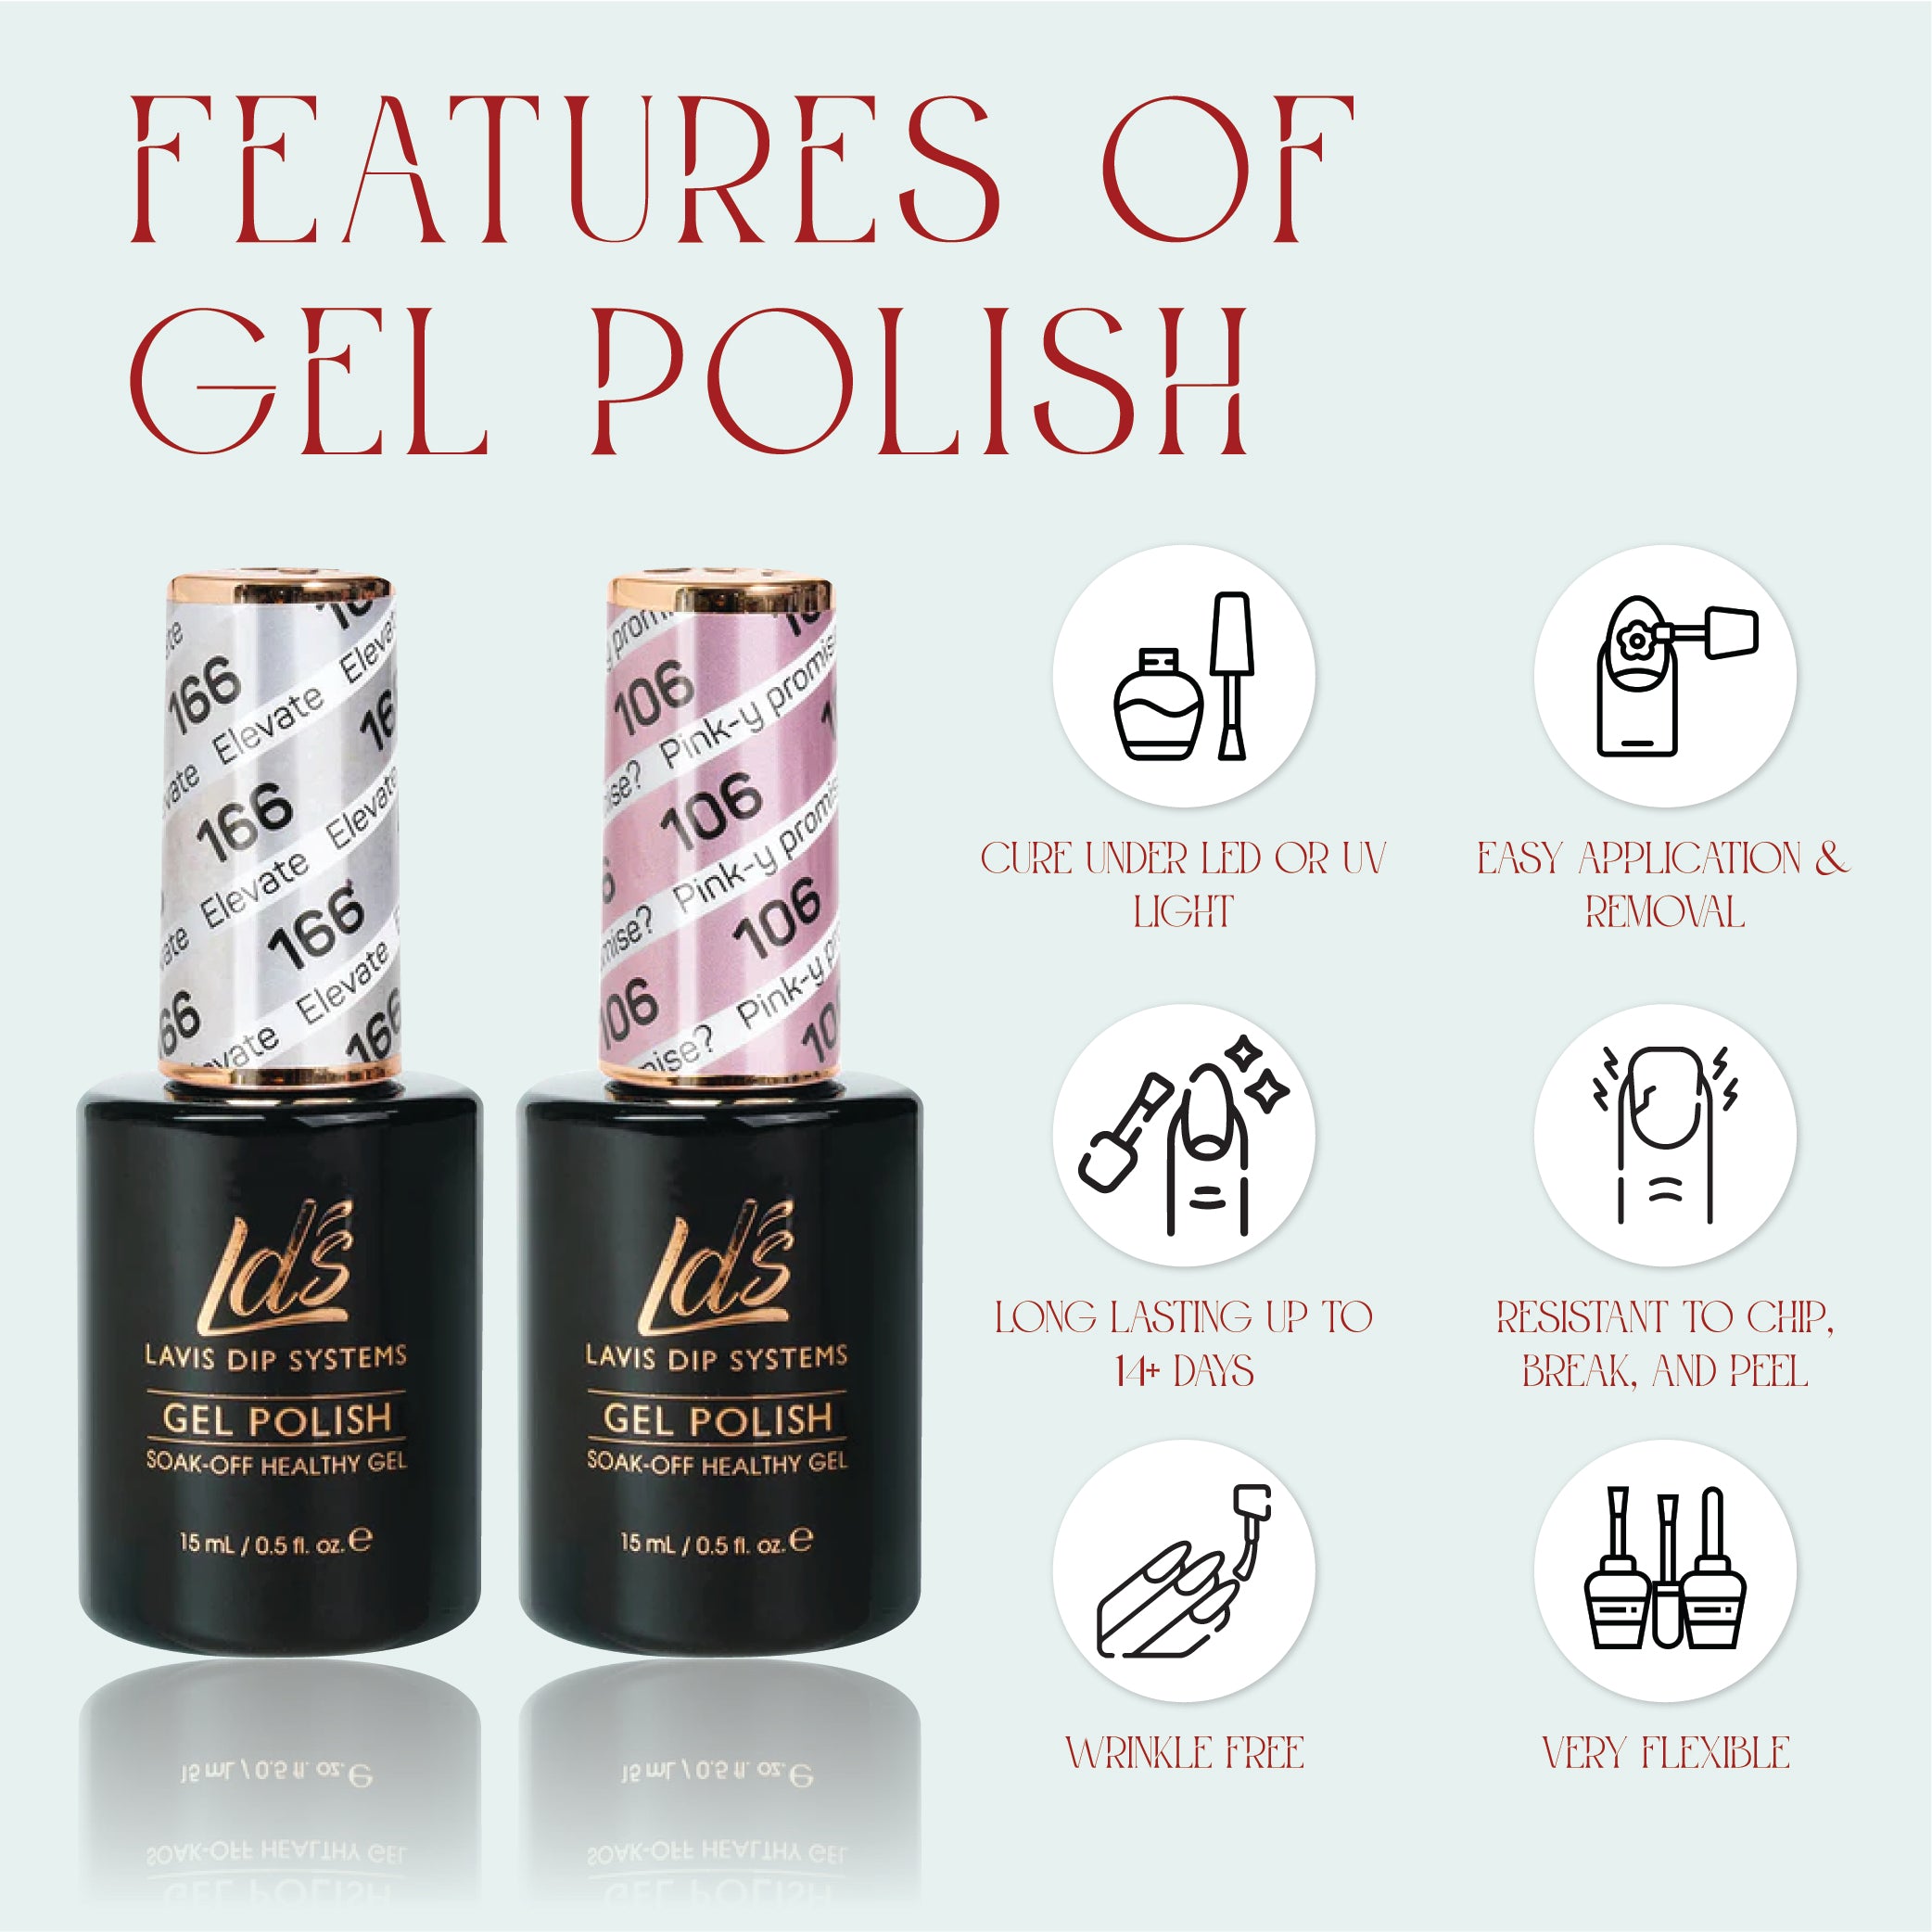 LDS Gel Nail Polish Duo - 100 Red Colors - Bloody Mary